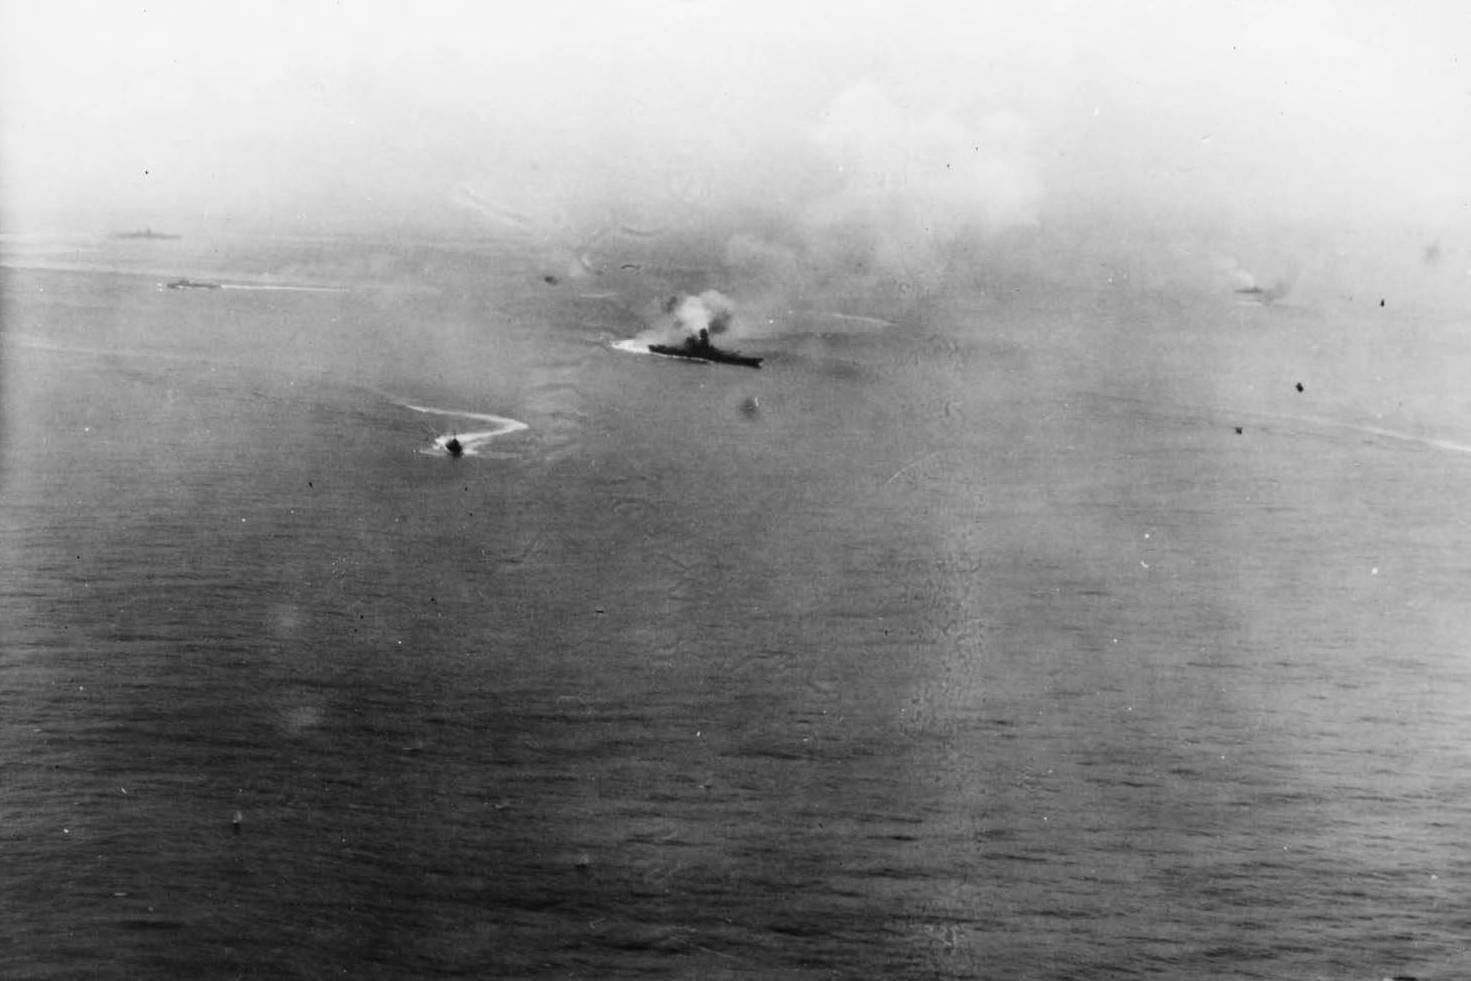 Yamato being attacked in the East China Sea, 7 Apr 1945. Note the Agano-class cruiser Yahagi in the upper left distance.